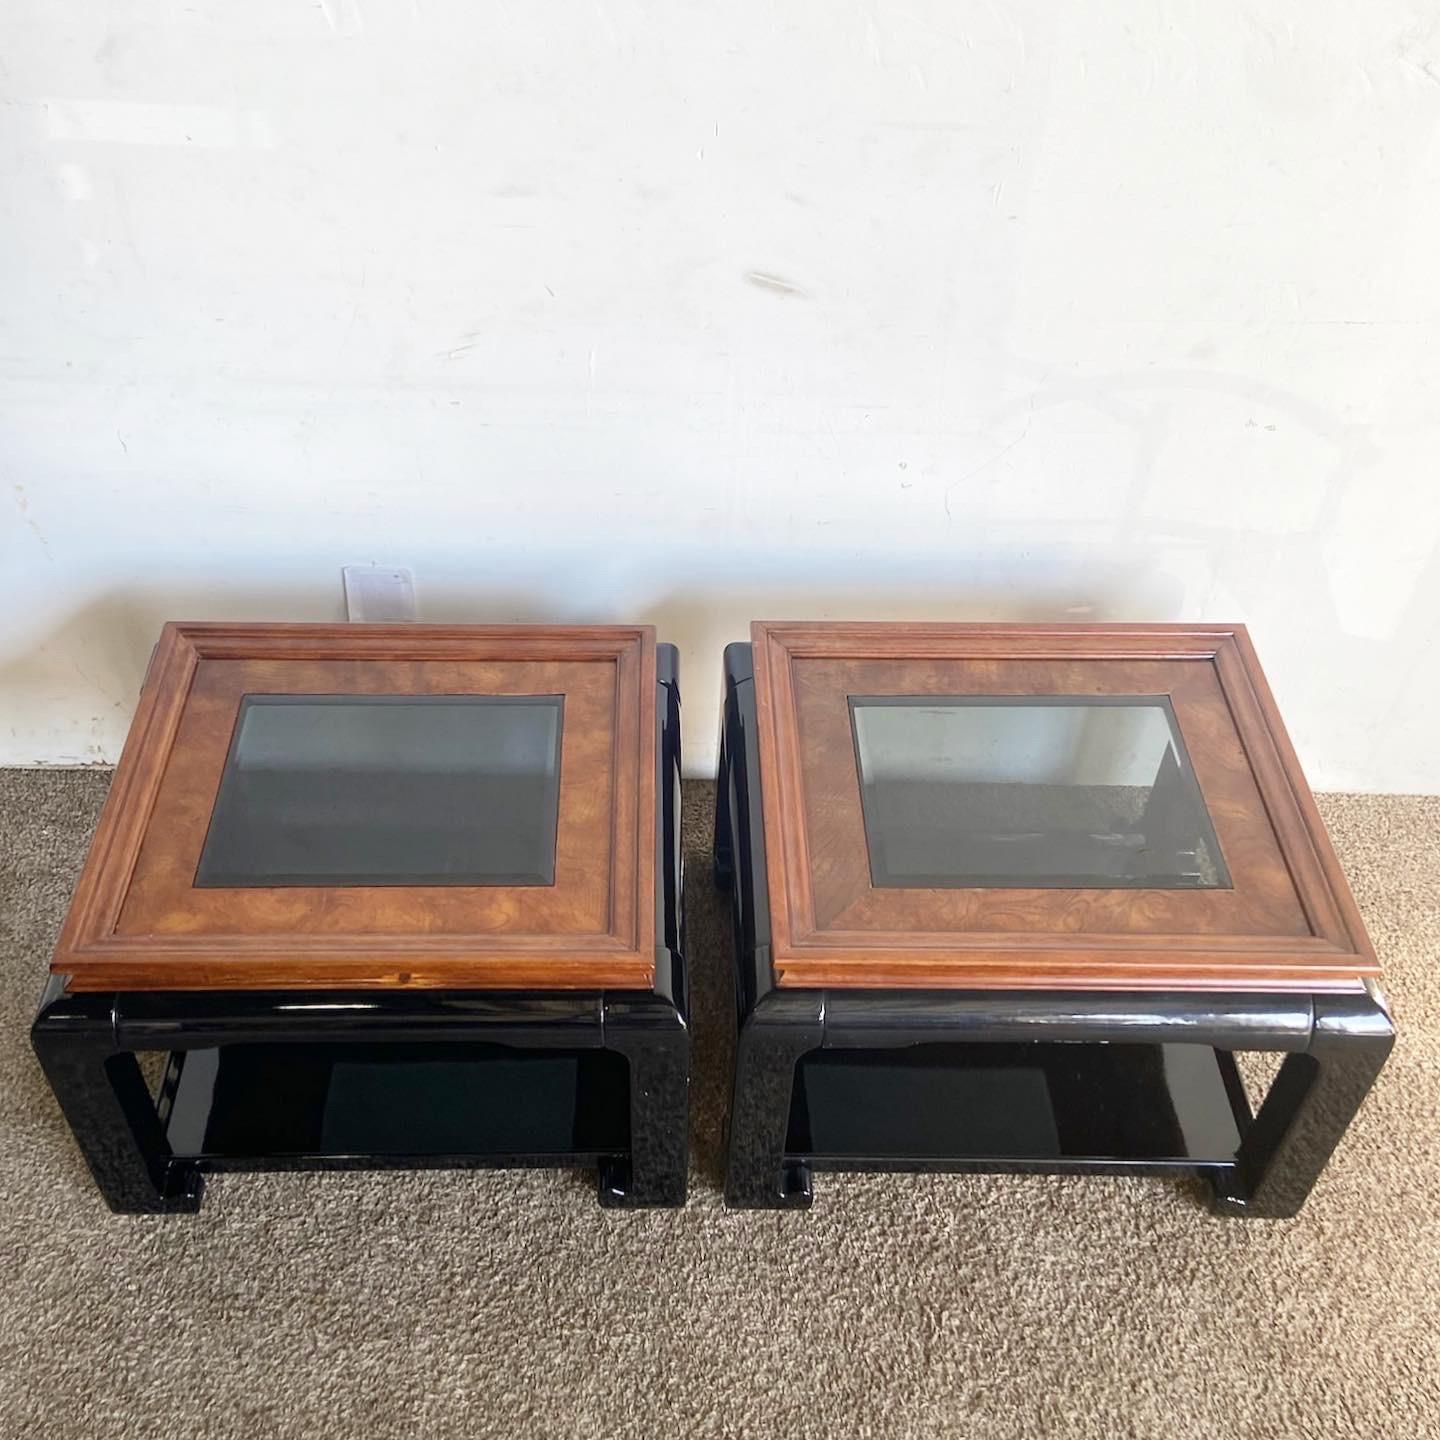 Elevate your interior with these Chinoiserie Black Lacquered and Burl Wood Glass Top Side Tables. These tables blend Eastern aesthetics with modern design, featuring intricate burl wood inlays and glass tops.
Some chips and wear as seen in the